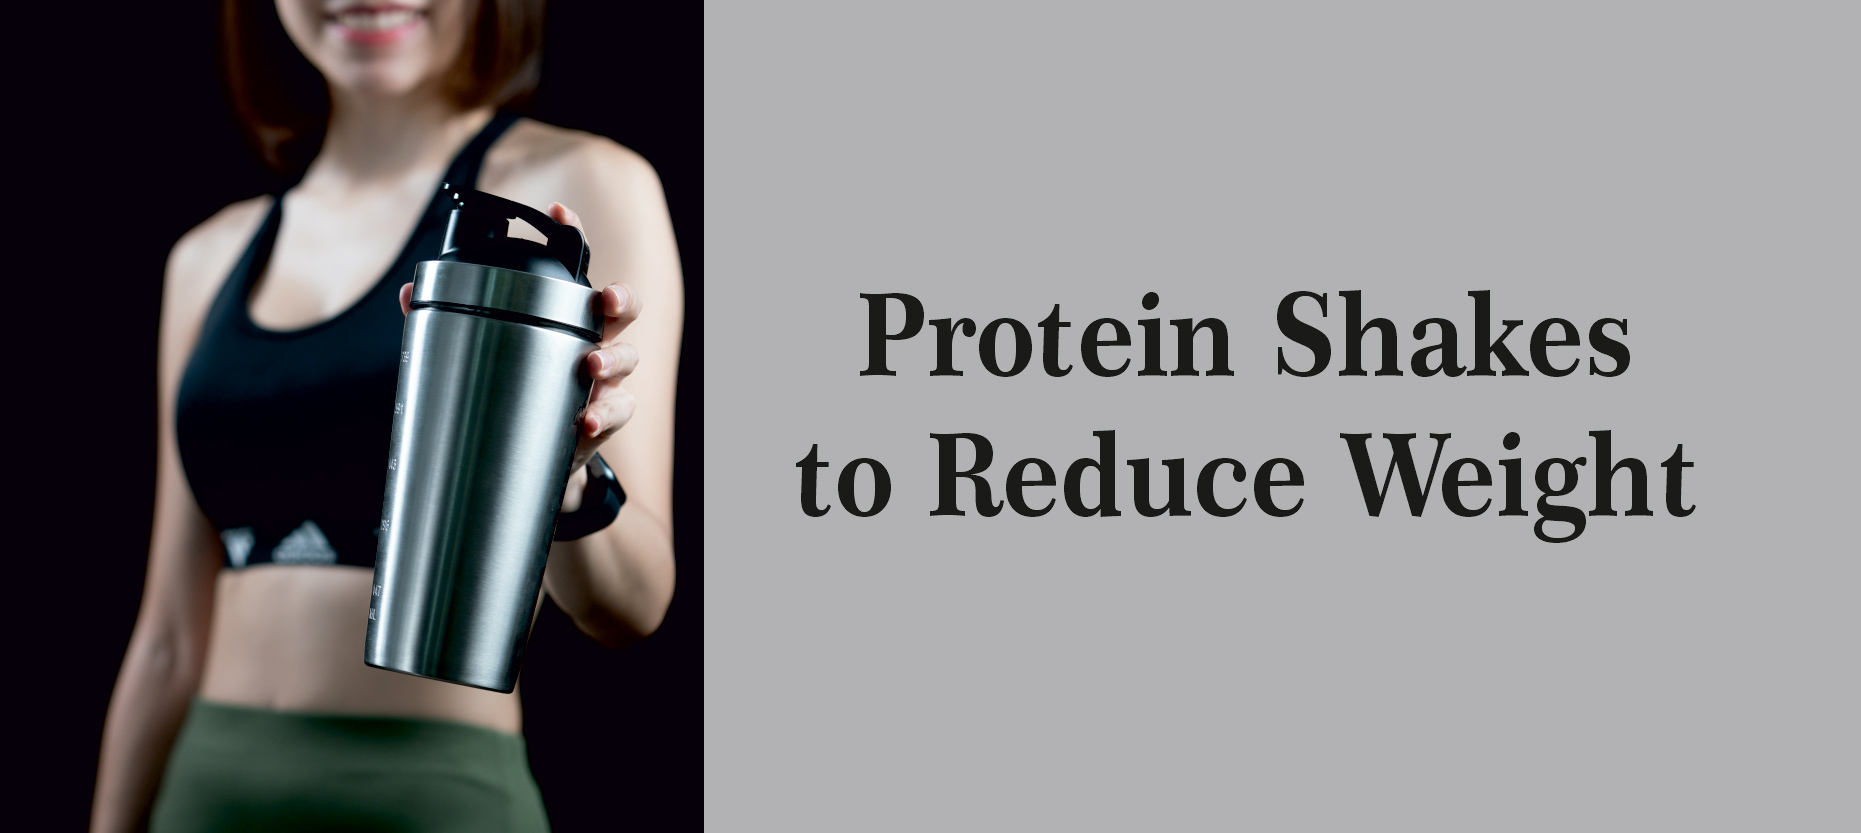 Protein Shakes to Reduce Weight